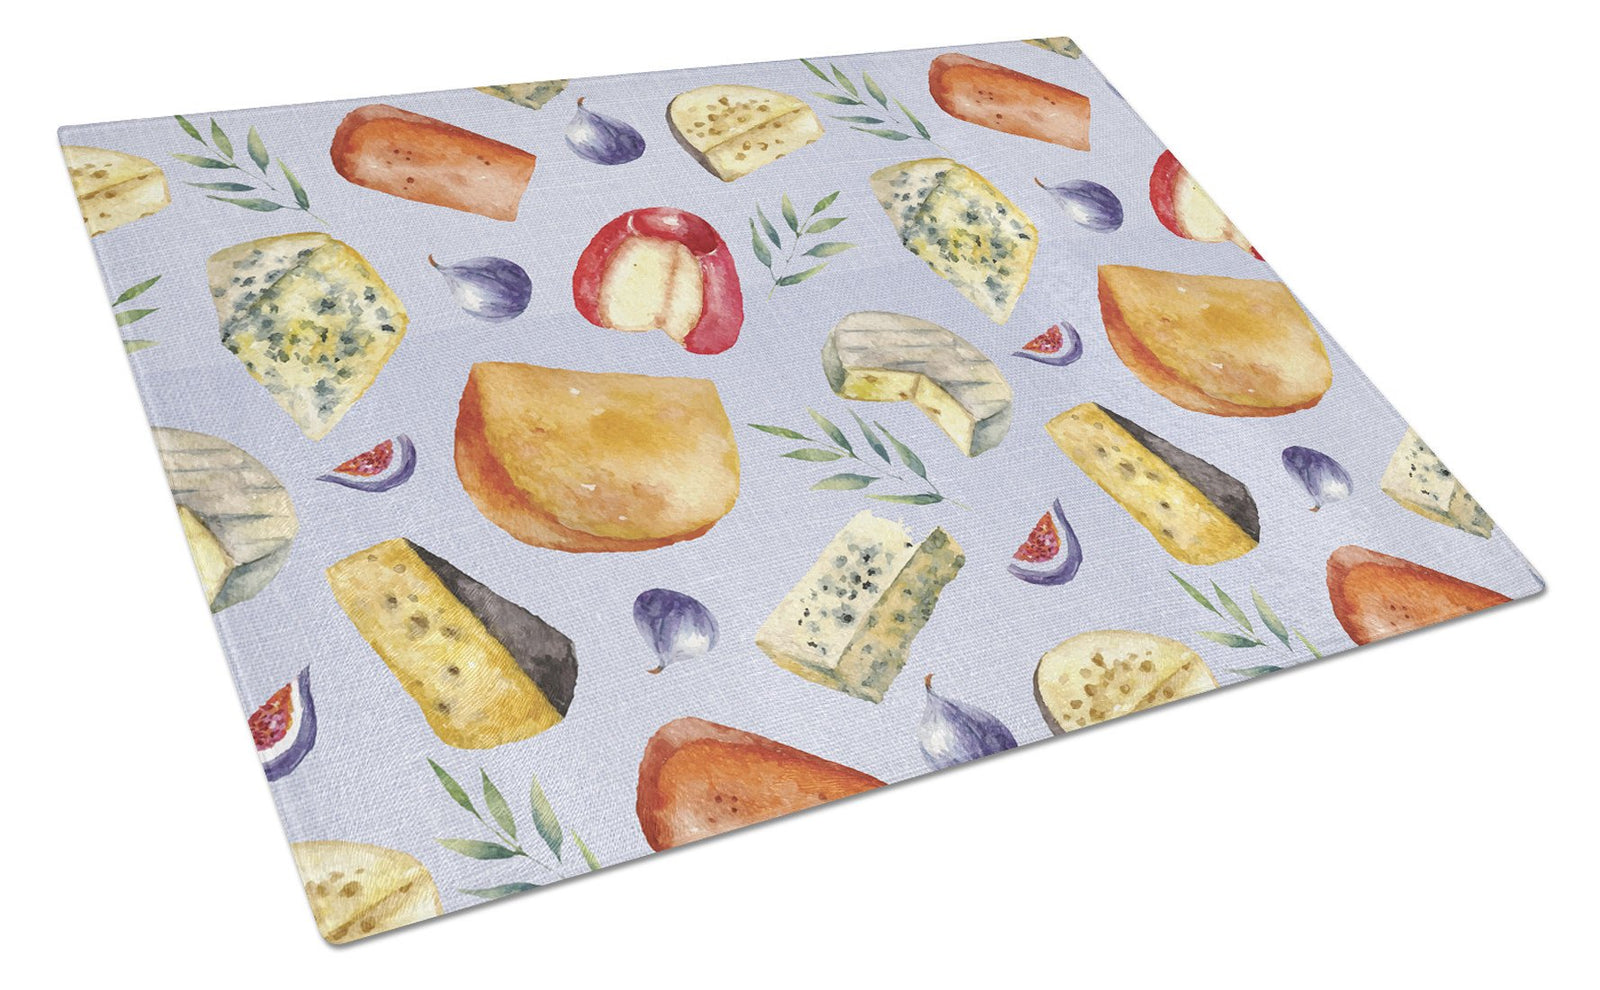 Assortment of Cheeses Glass Cutting Board Large BB5198LCB by Caroline's Treasures